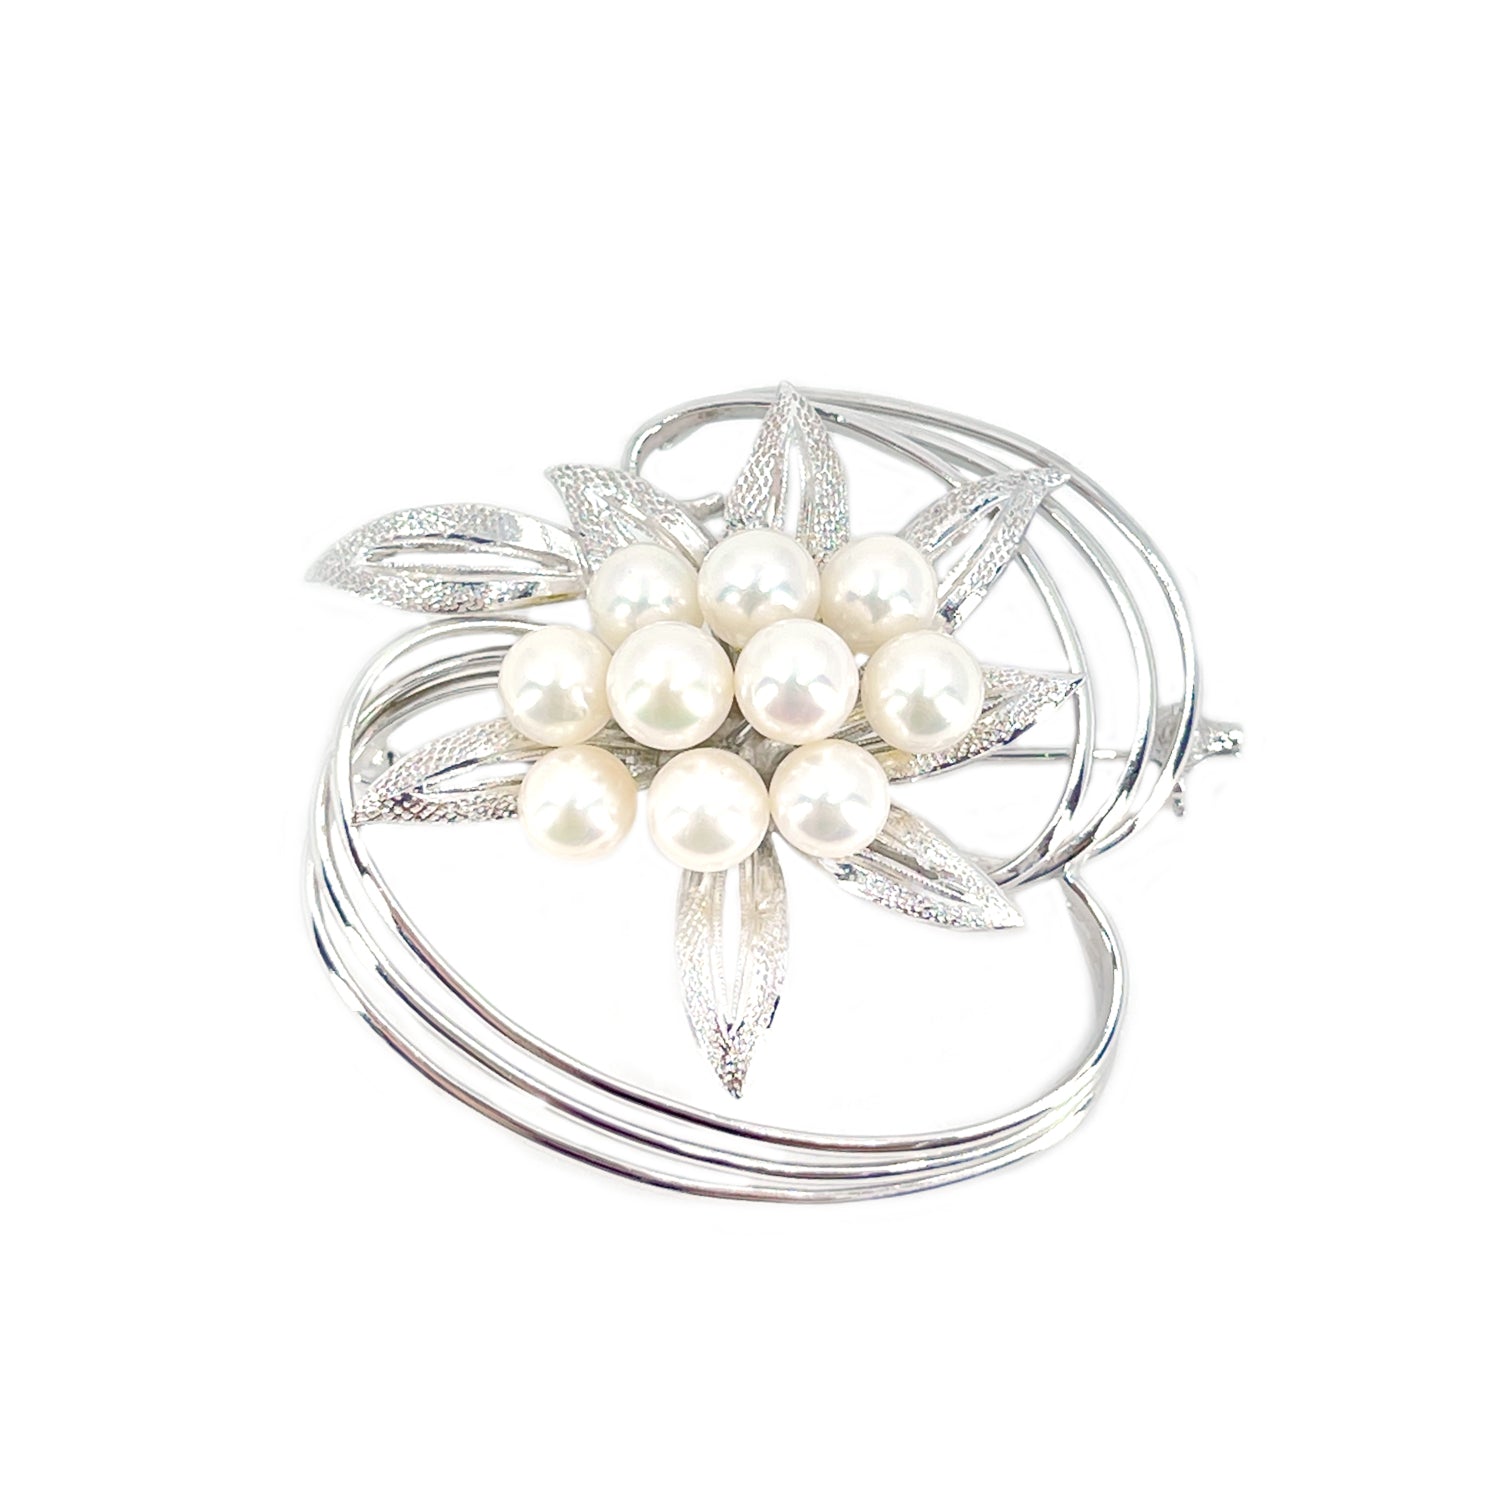 Atomic Age Mid Century Japanese Saltwater Akoya Vintage Cultured Pearl Brooch- Sterling Silver